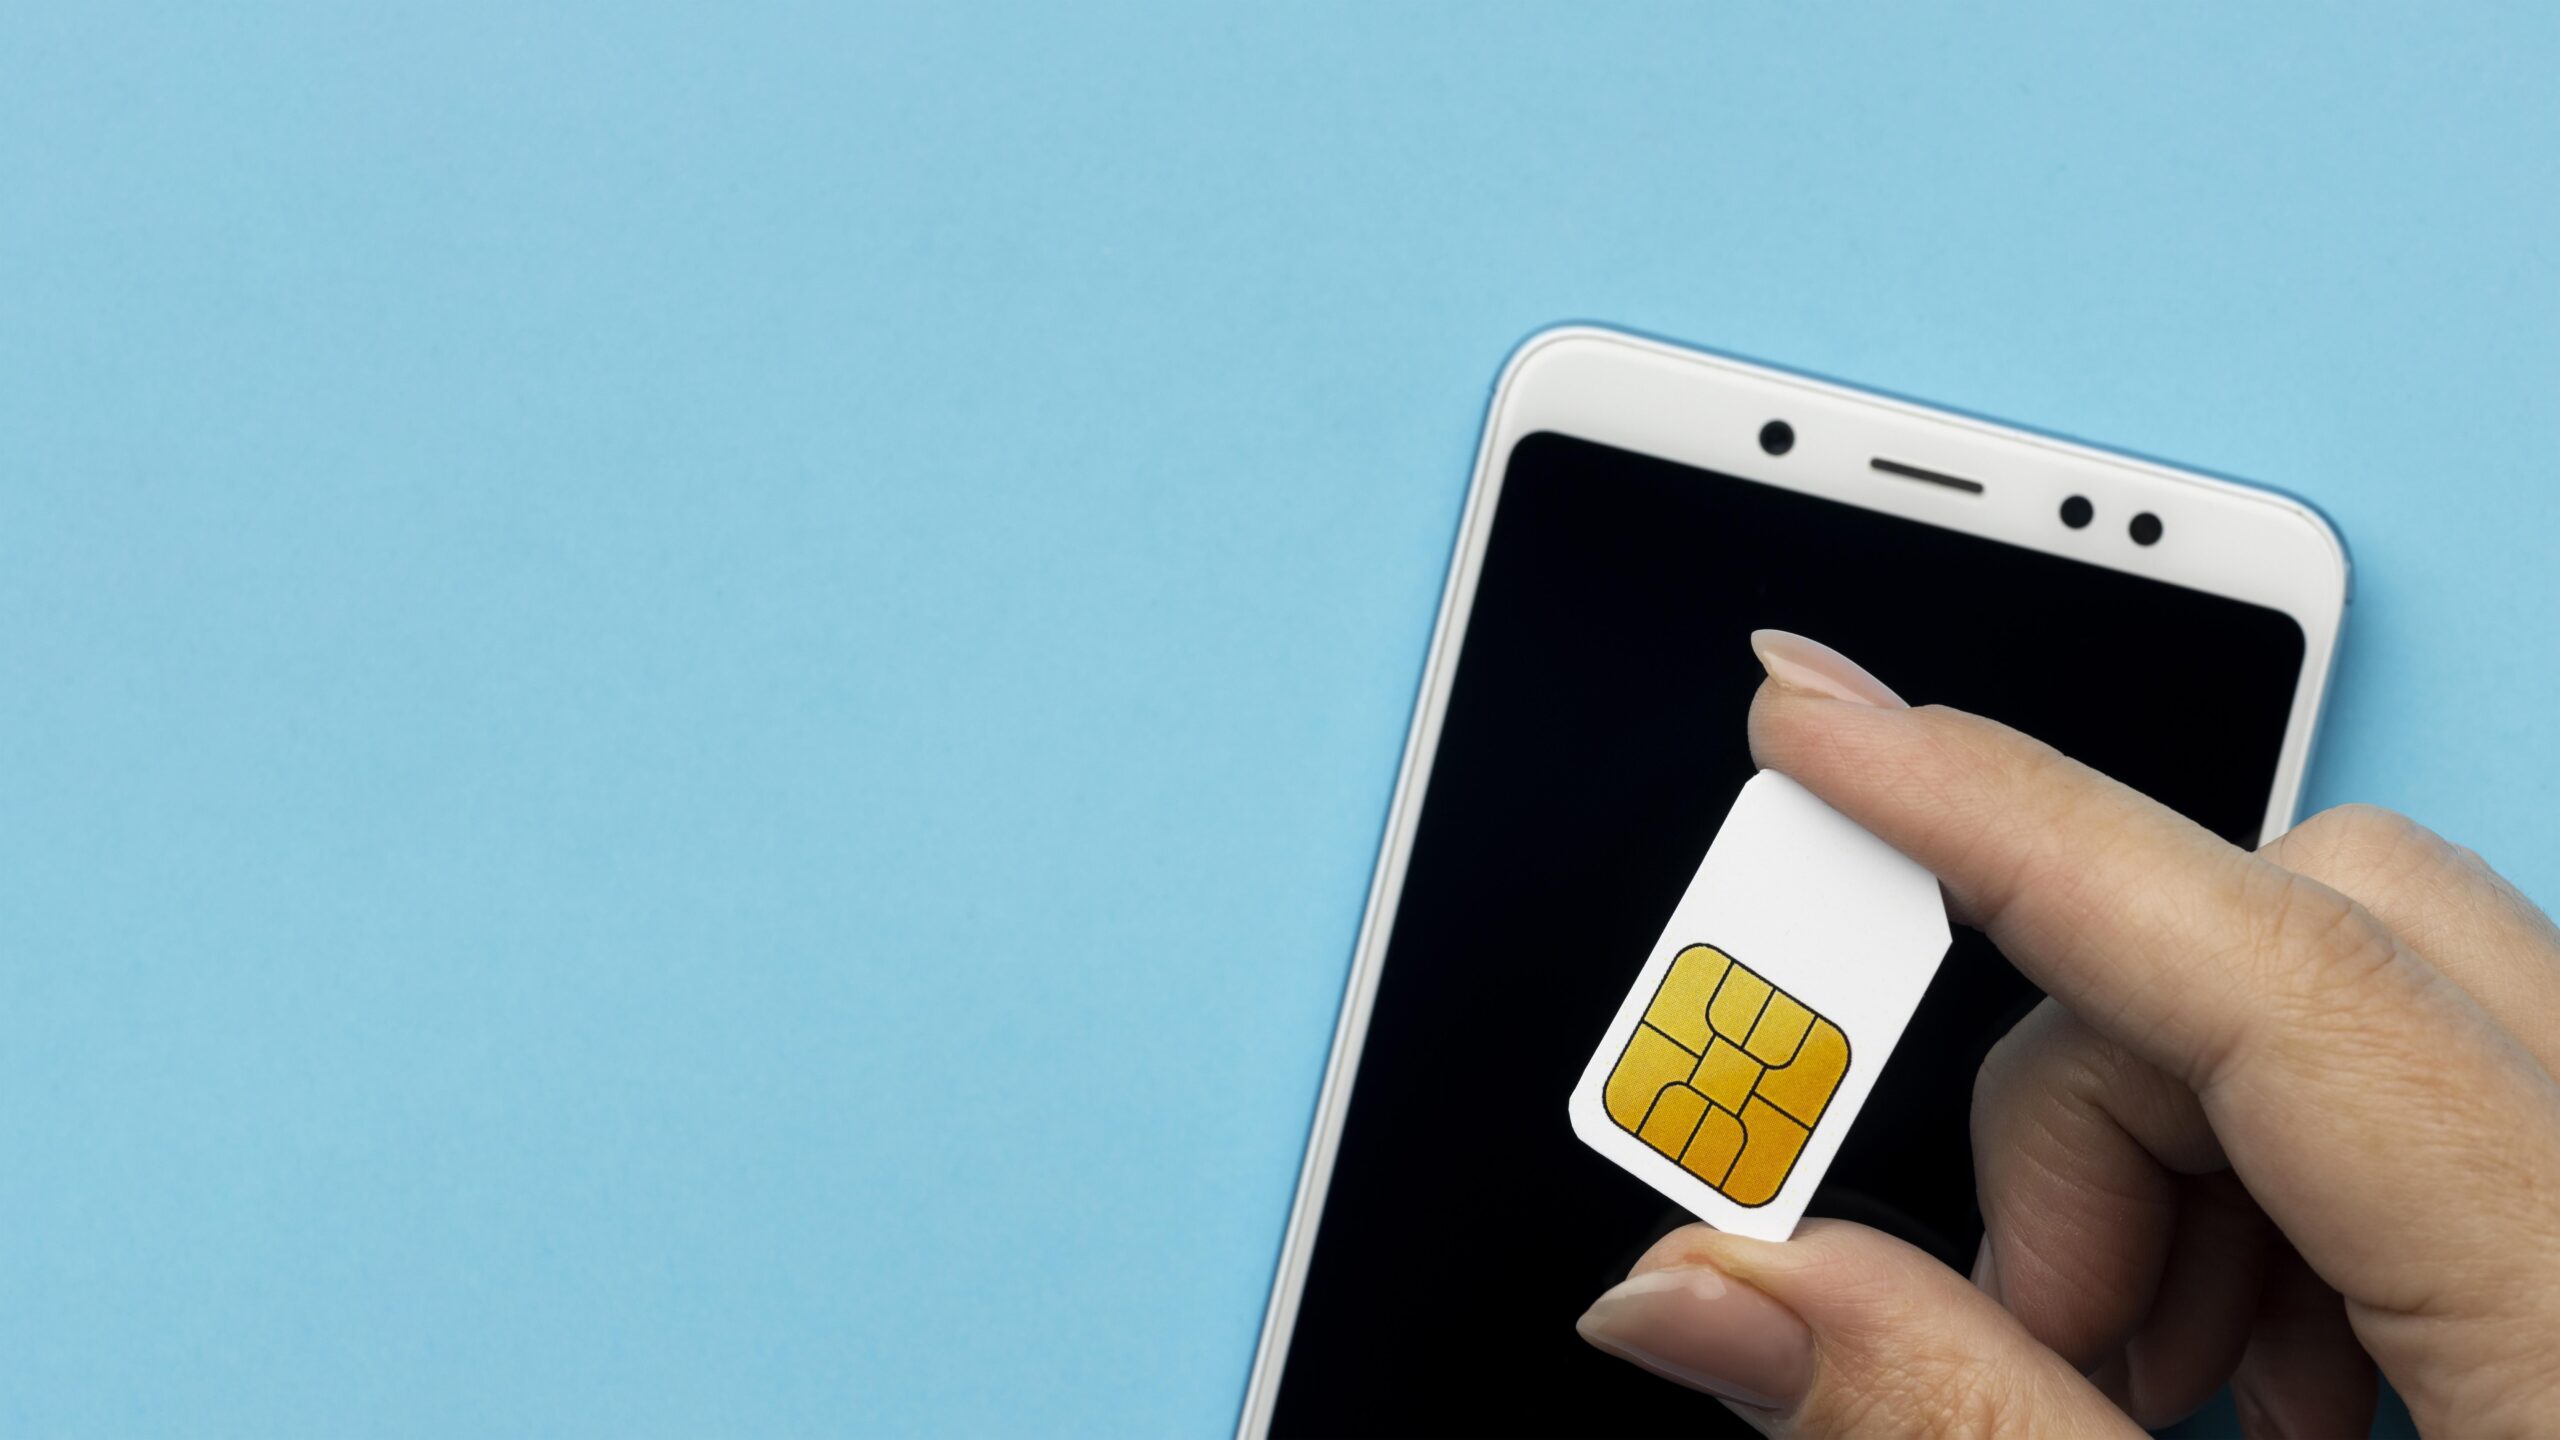 Kolet Partners with Travel Giants to Offer Seamless eSIM Connectivity